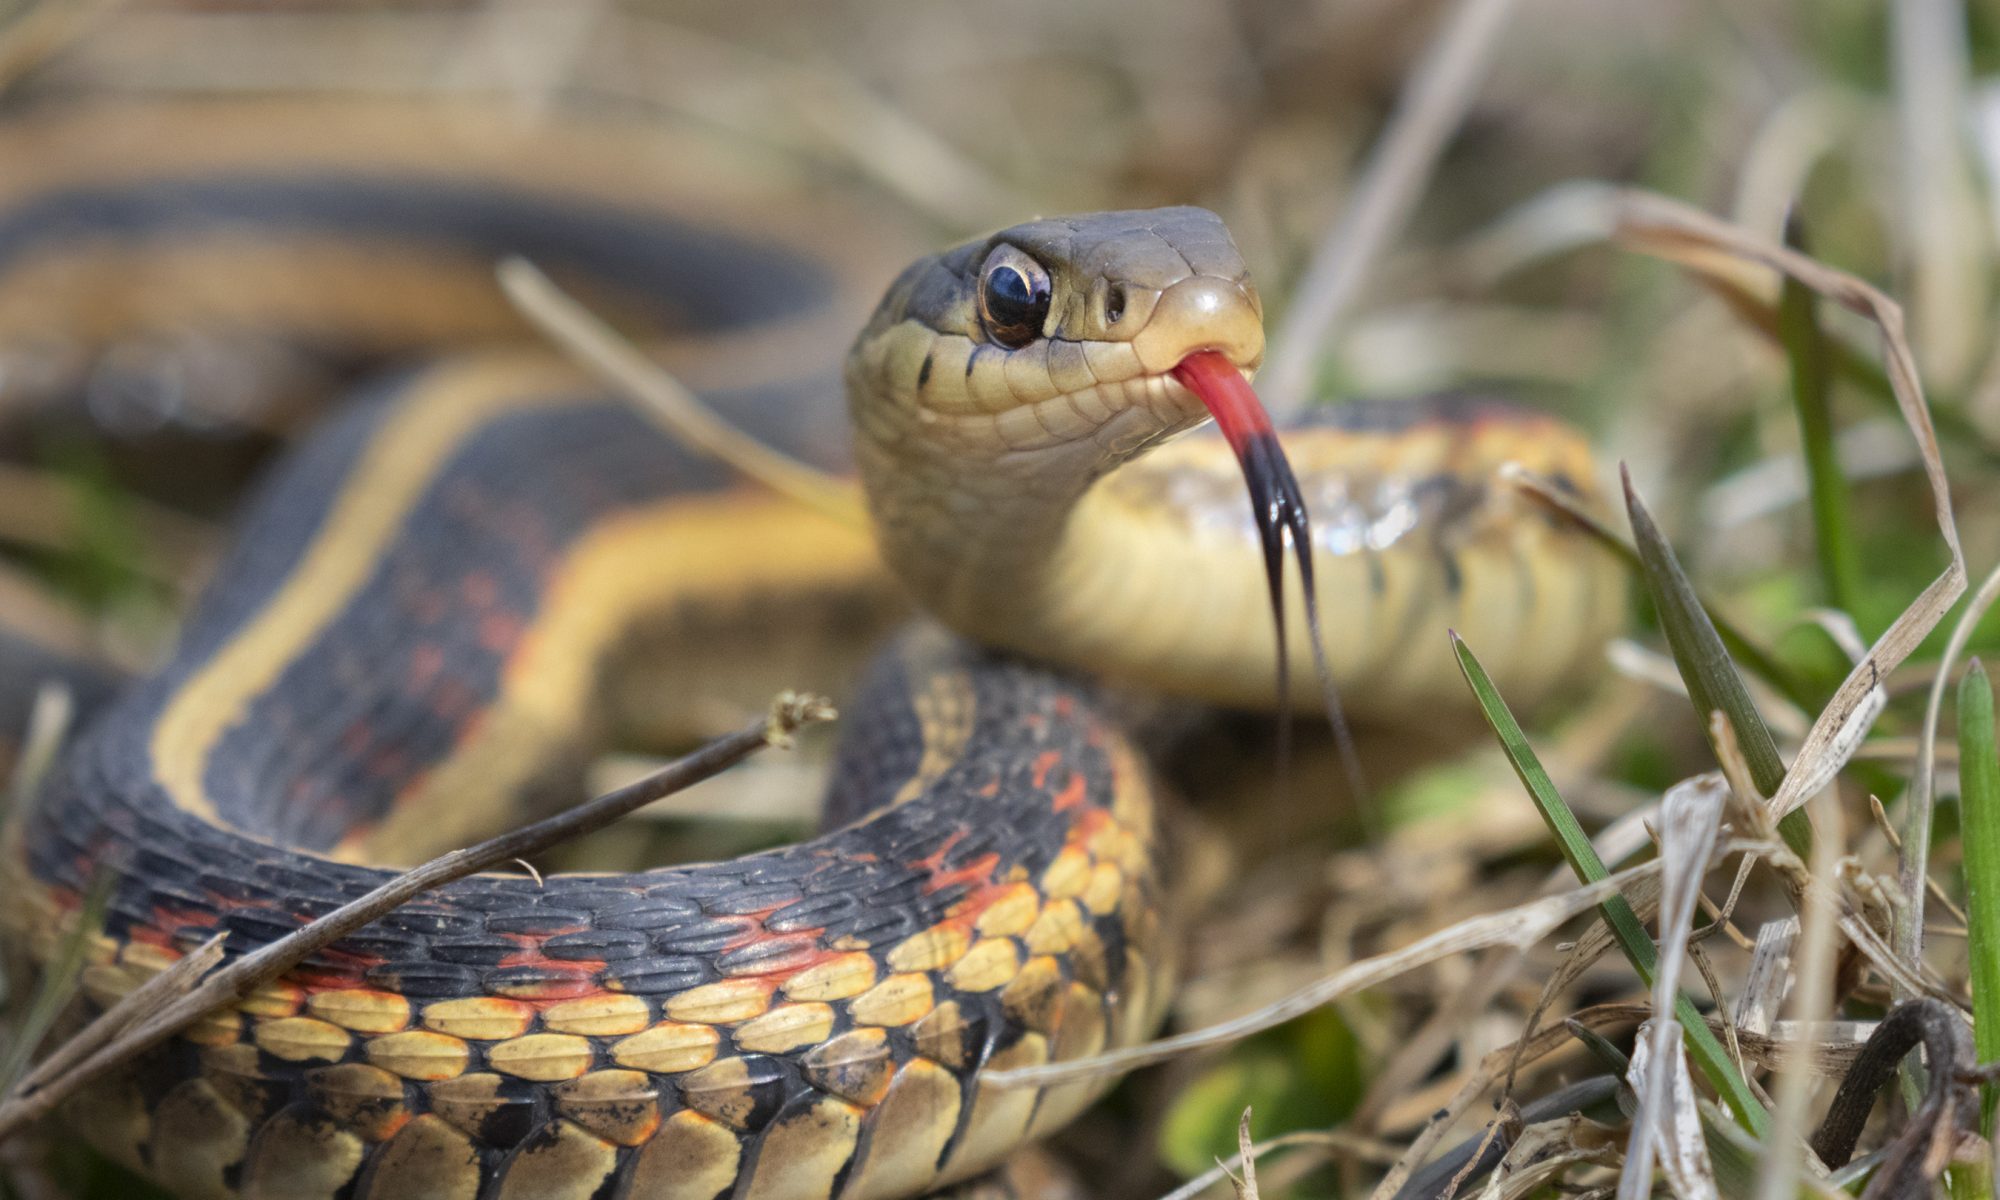 Common garter snake (Thamnophis sirtalis) with tongue out,